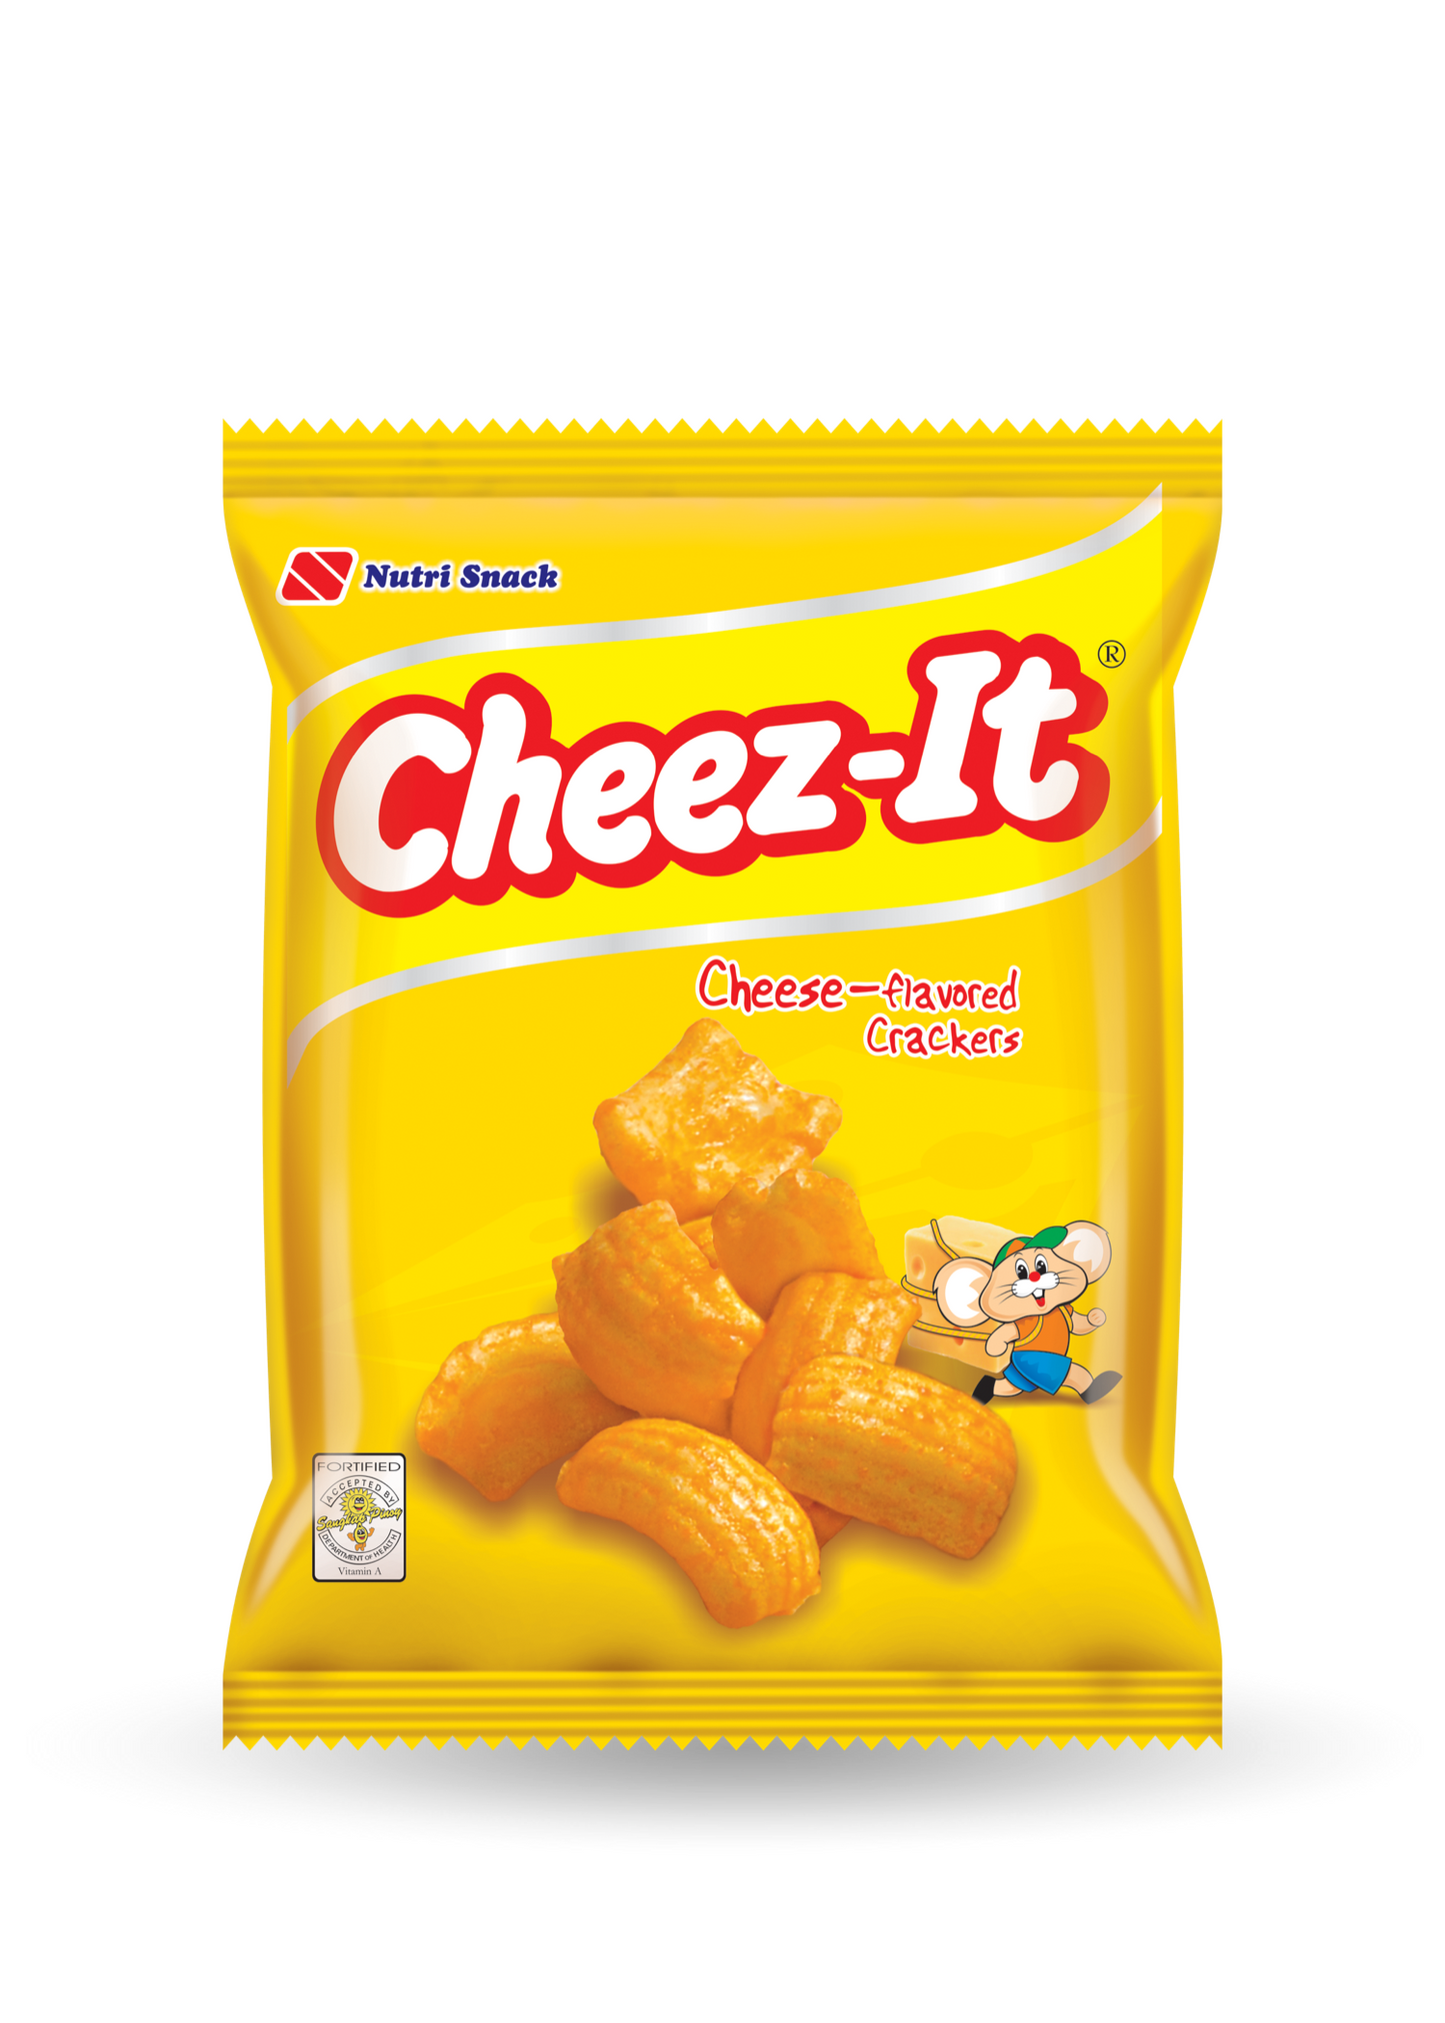 Nutri Snack | Cheez-it Crackers | Cheese